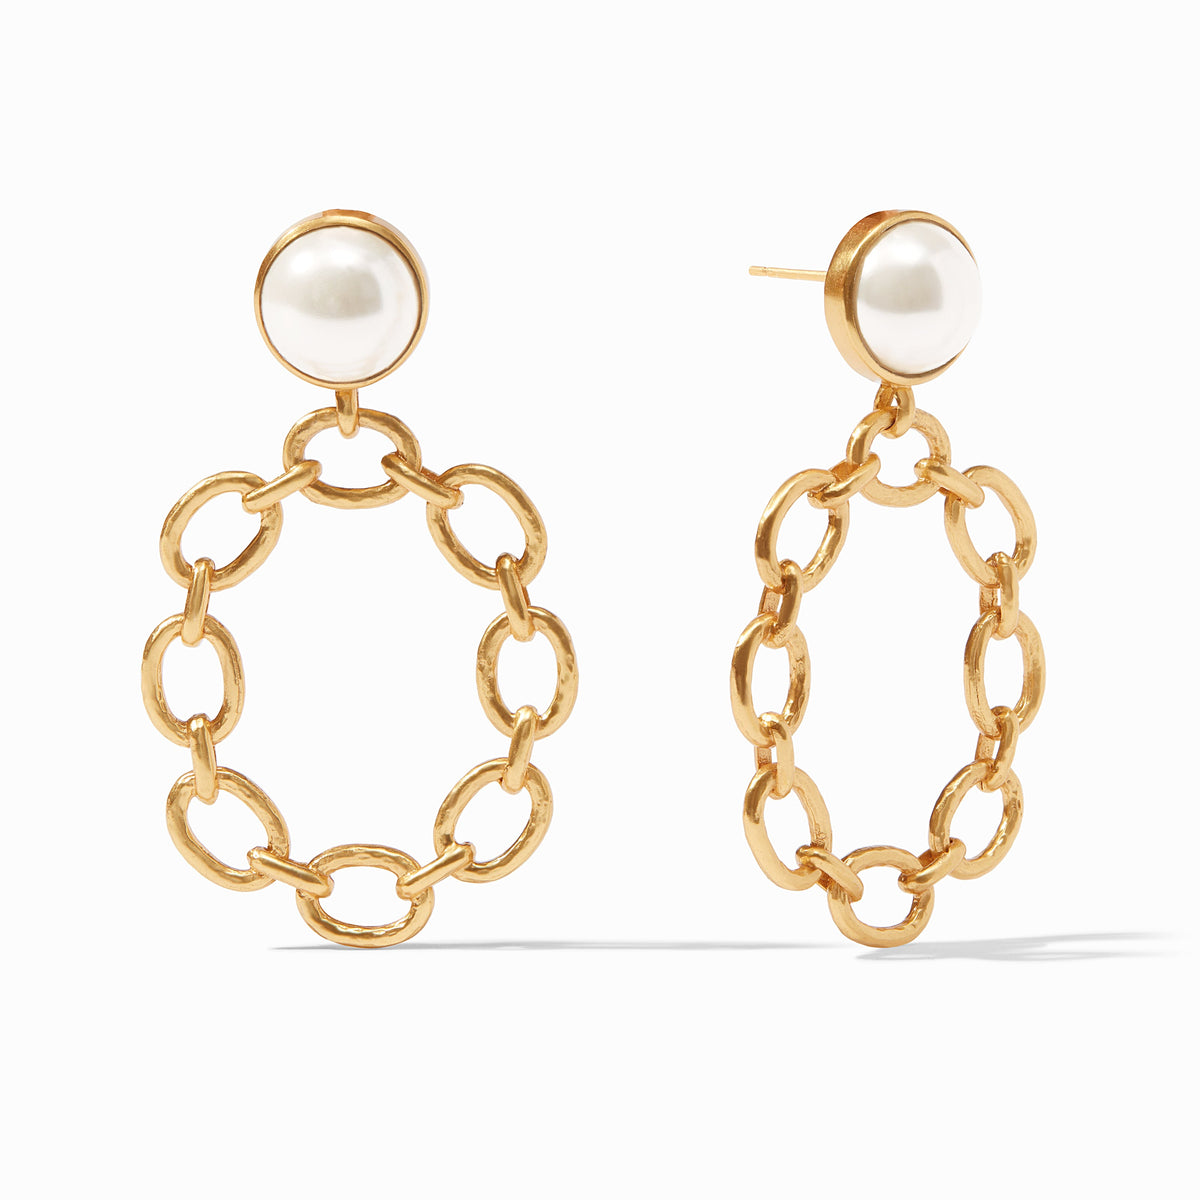 Julie Vos - Palermo Statement Earring, Pearl